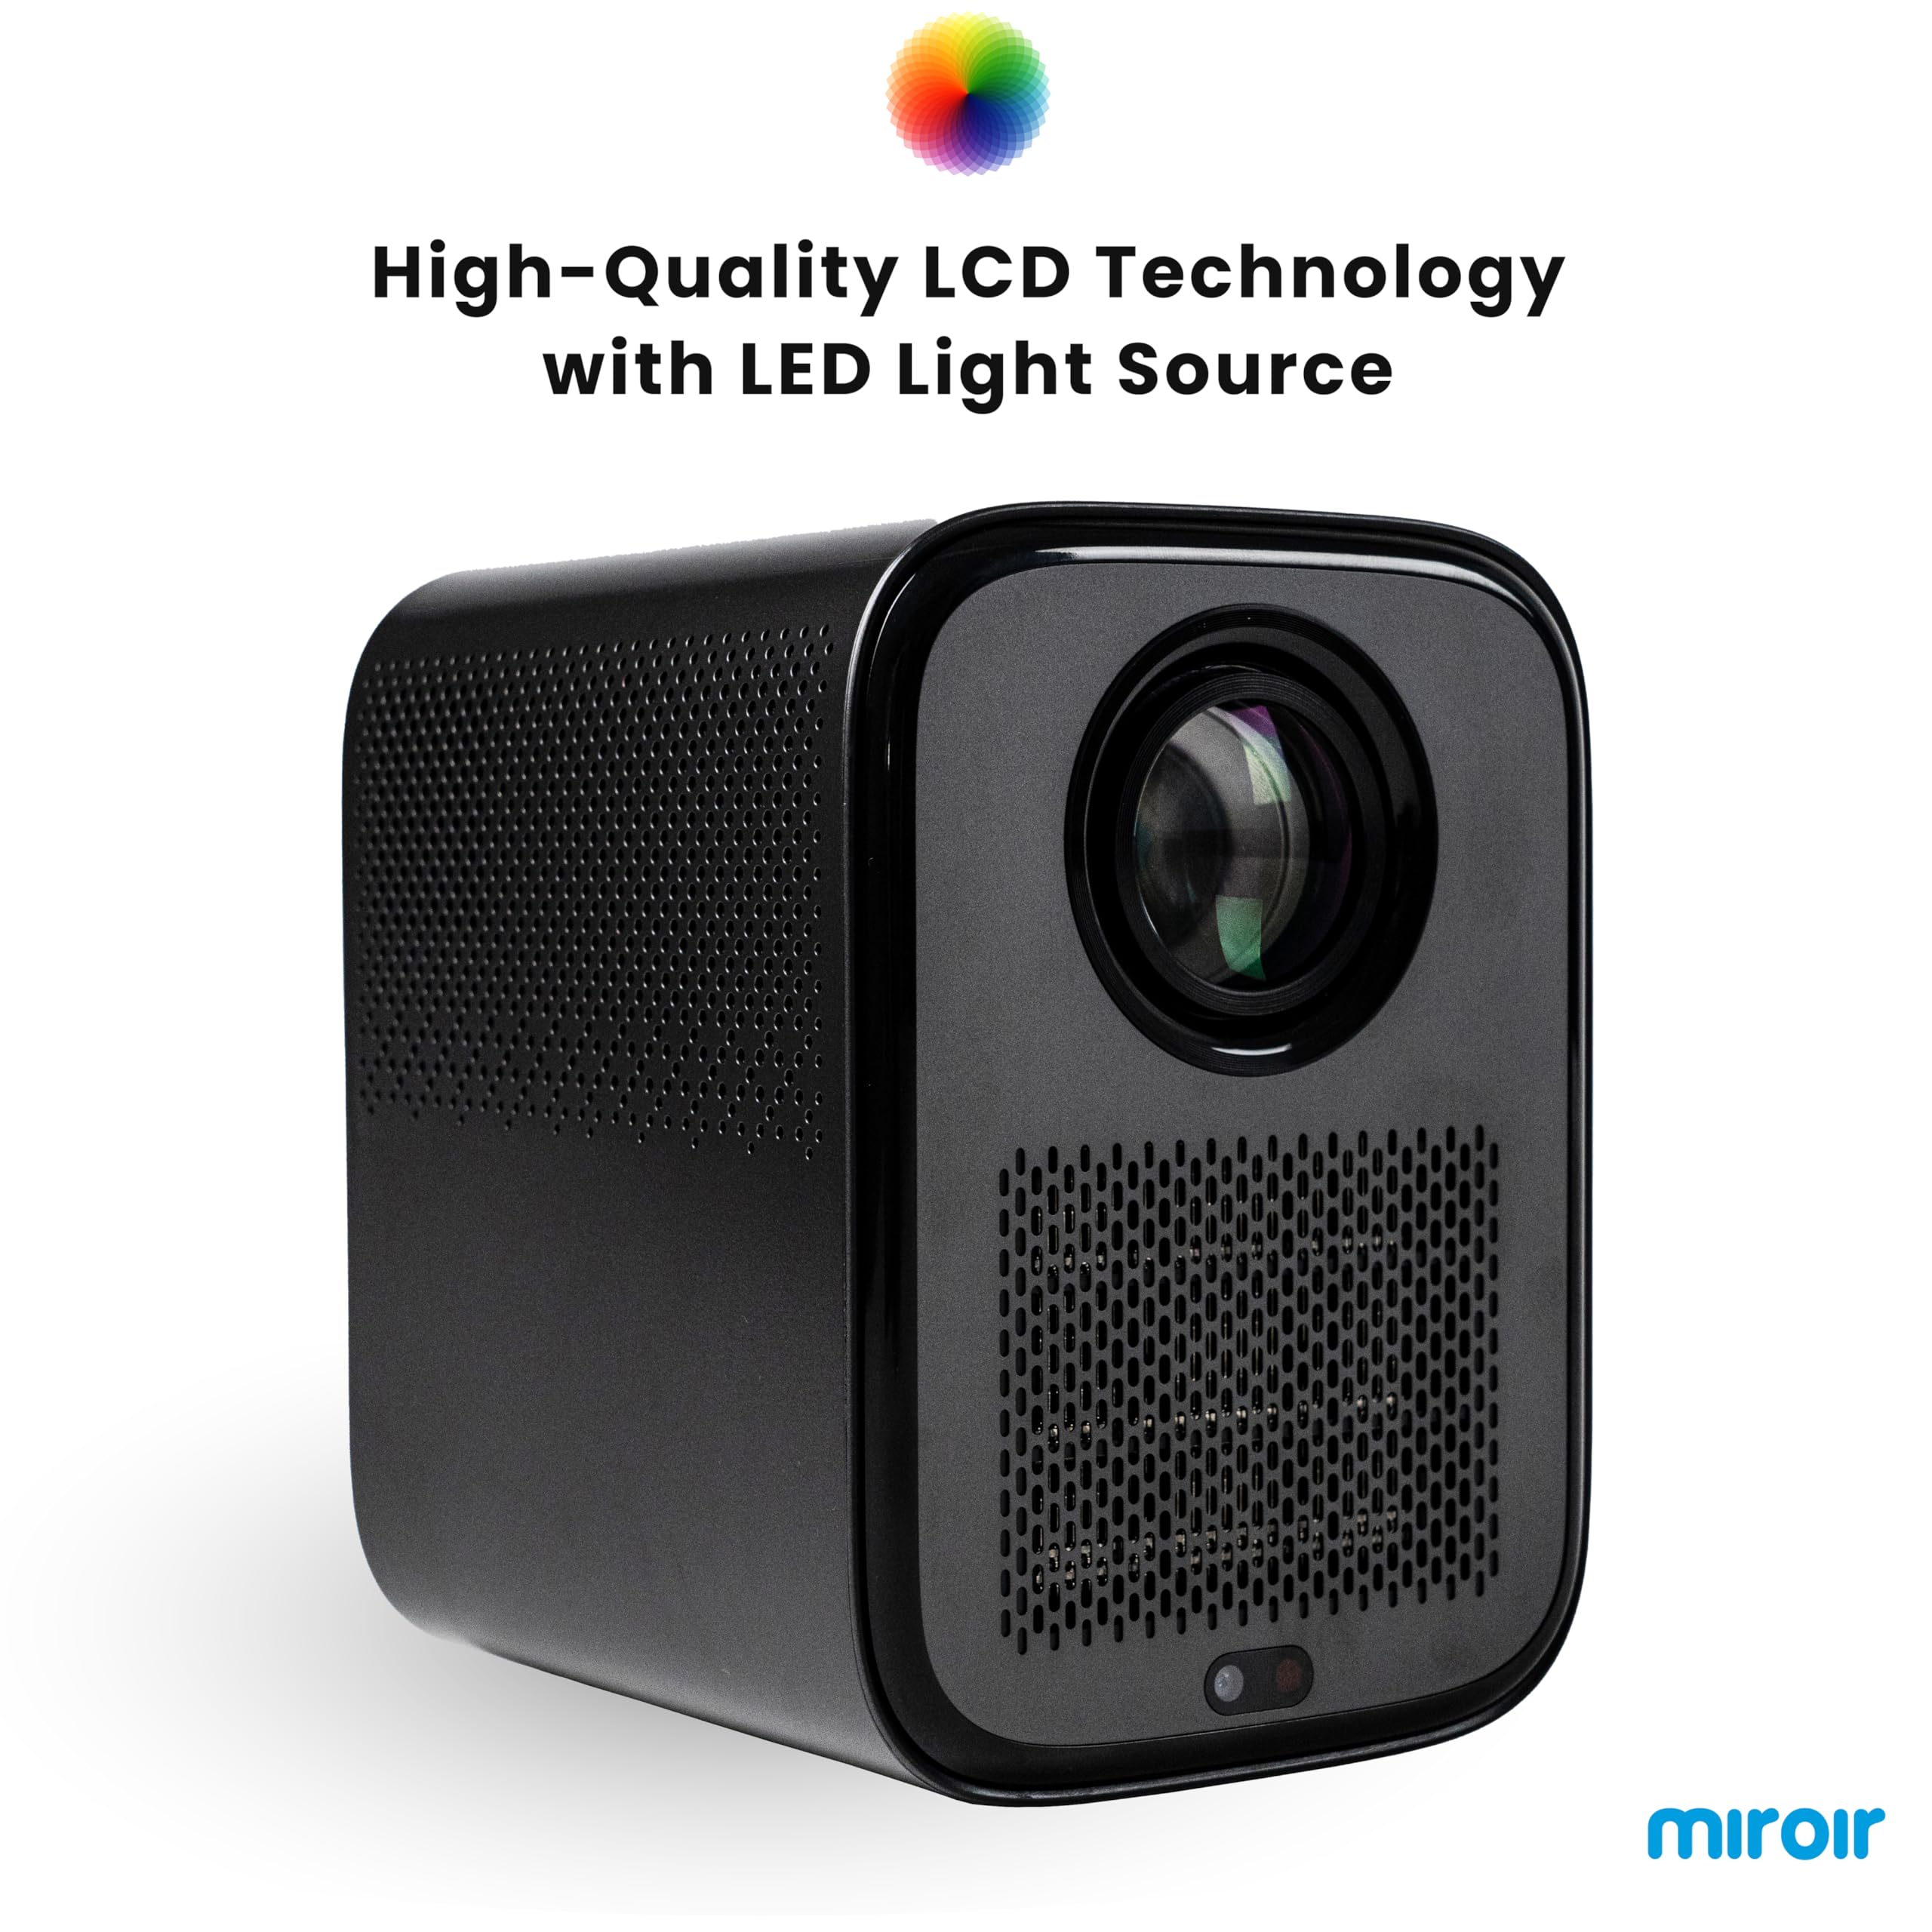 L710S Smart 1080p Projector with built-in streaming, WiFi, and Bluetooth. Enjoy amazing visuals with Automatic Focus, and Keystone. Digital Zoom and Dolby sound with 2x 5-watt speakers